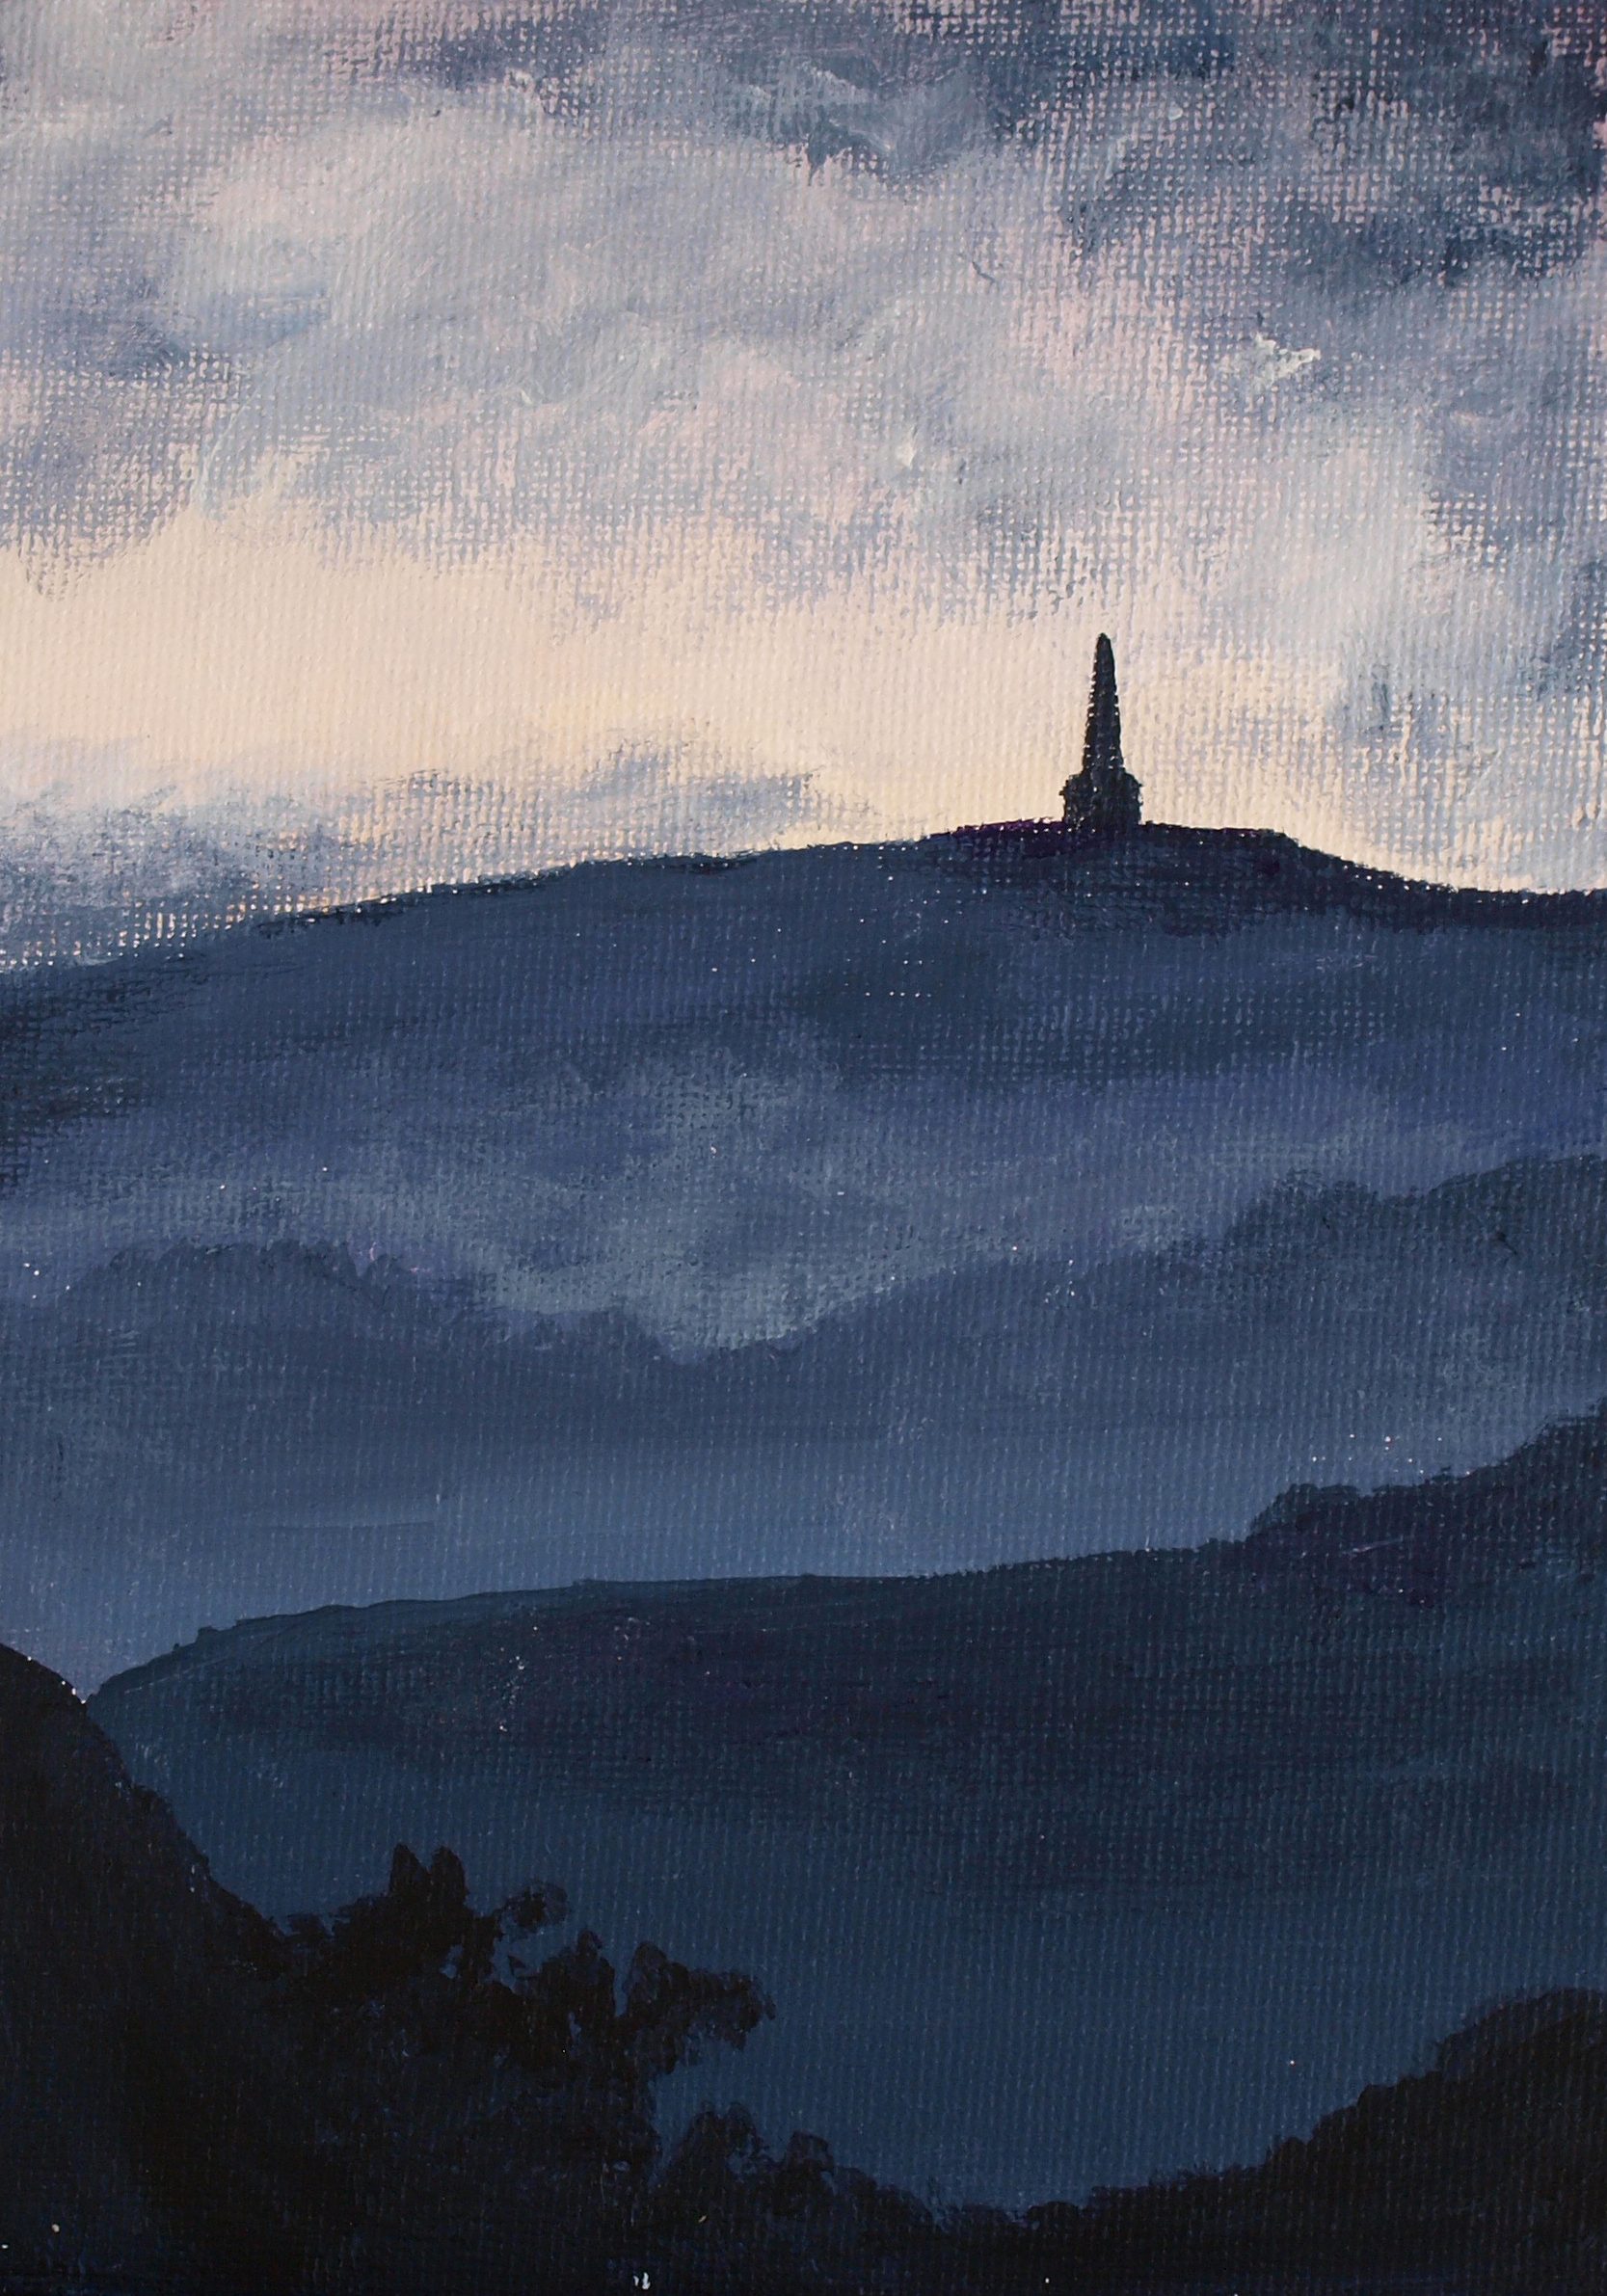 Stoodley Pike pen and ink illustration by Louisa Hill